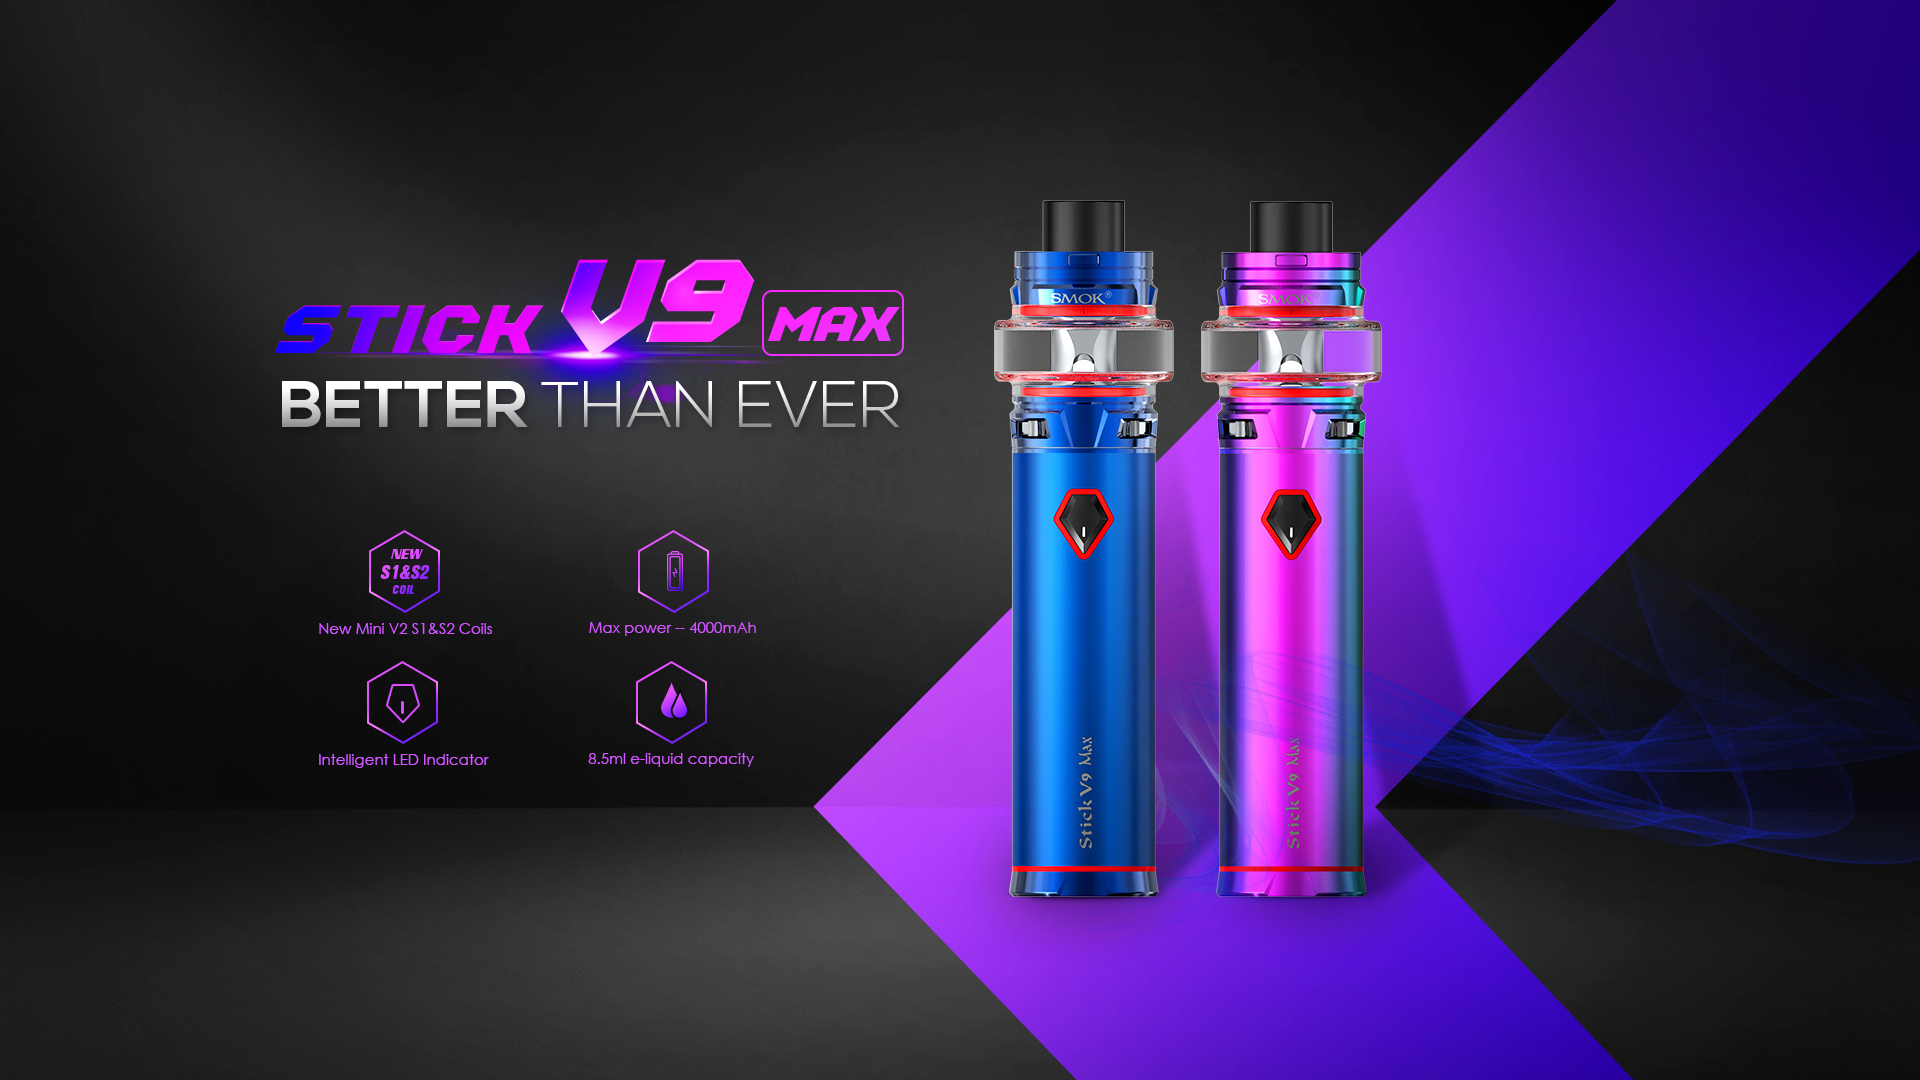 Smok Stick V9 Max Kit Preview---Anything Different From Stick V8